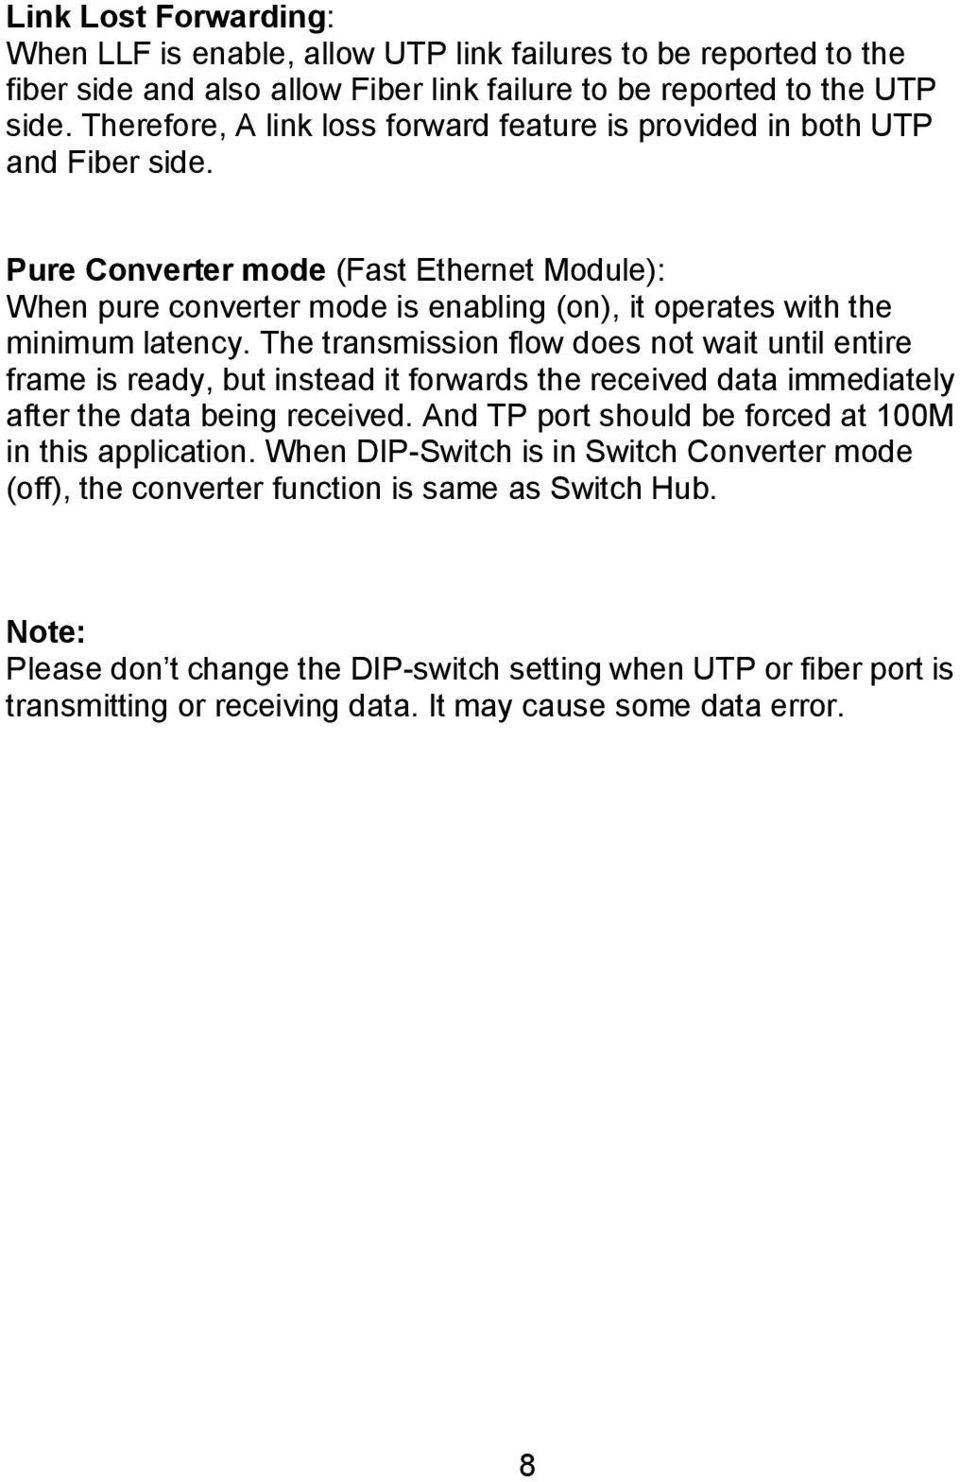 Pure Converter mode (Fast Ethernet Module): When pure converter mode is enabling (on), it operates with the minimum latency.